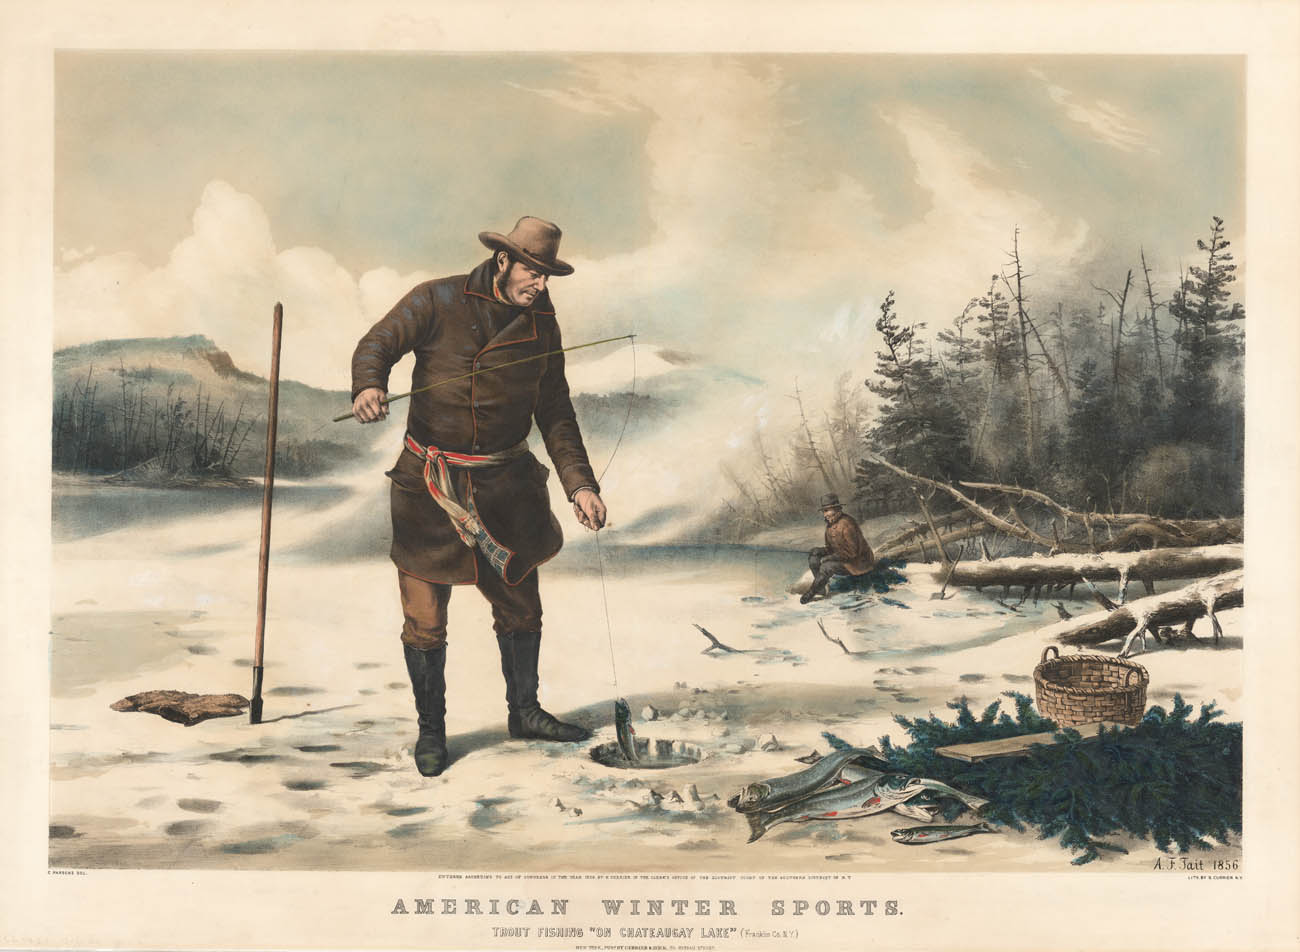 American Winter Sports. : Trout Fishing "On Chateaugay Lake" (Franklin Co. N. Y.).